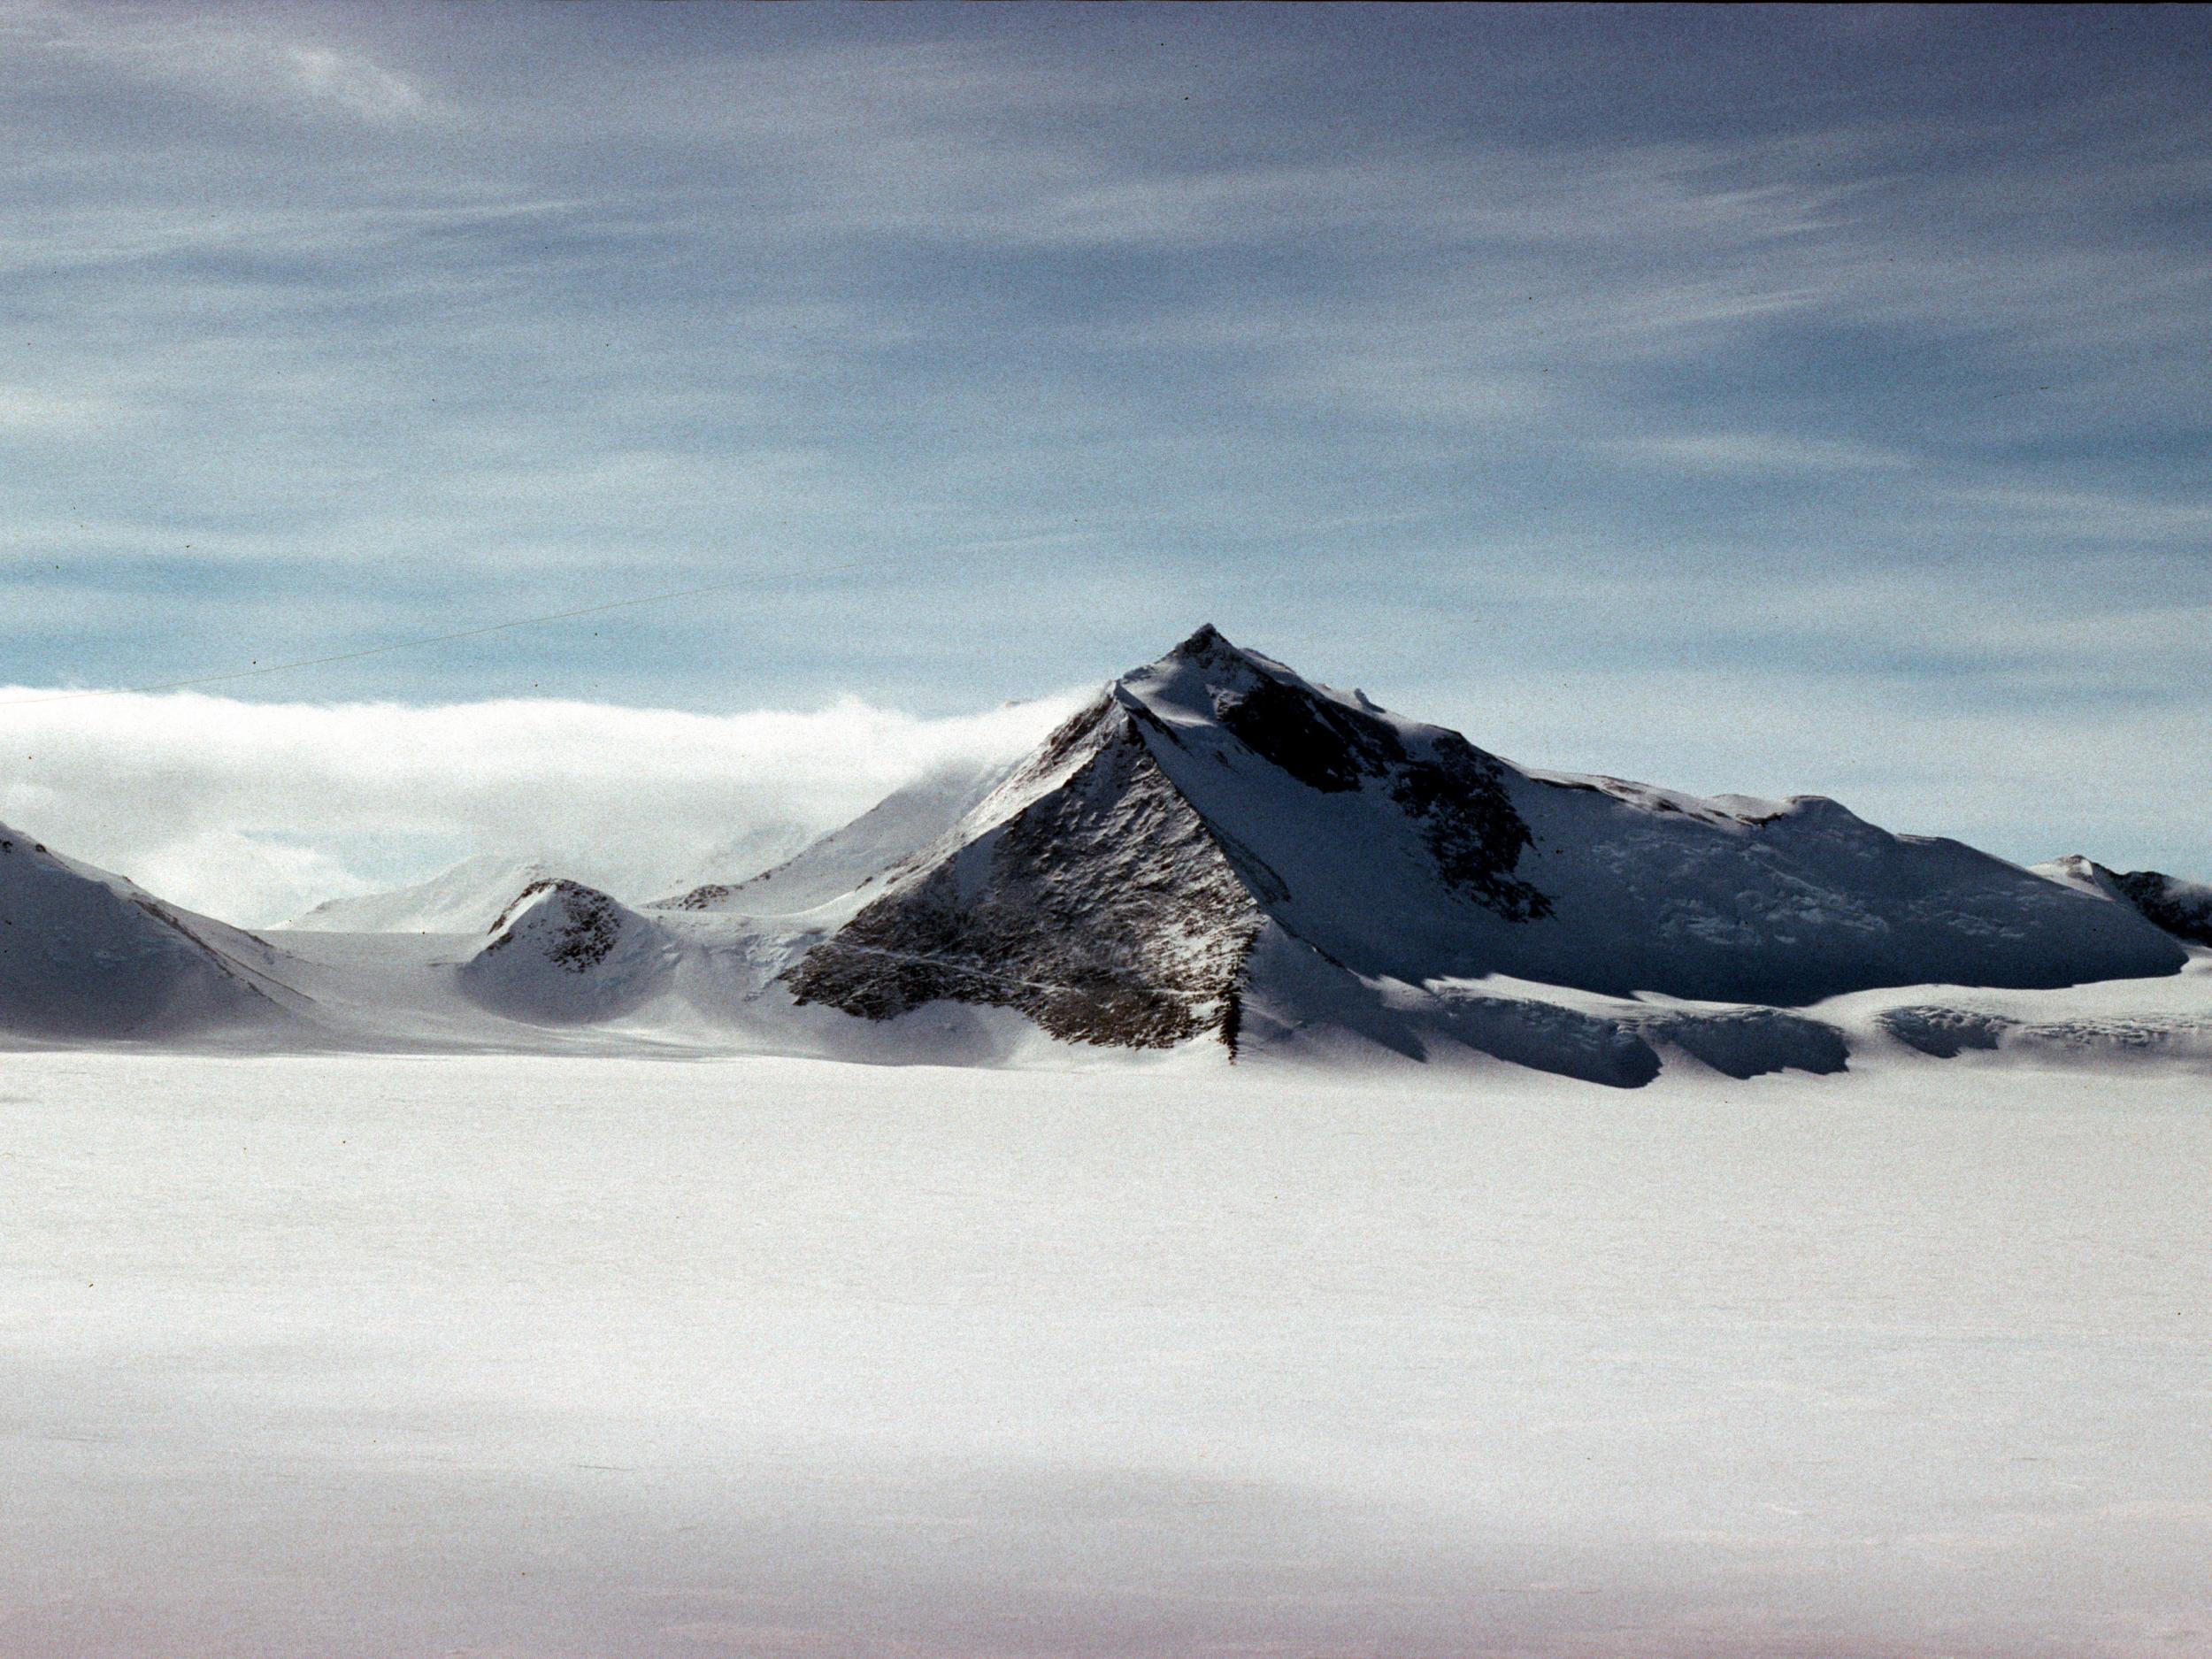 Mount Hope is 3,239 metres, meaning it knocks Mount Jackson, the current title holder at 3,184 metres, off the top spot